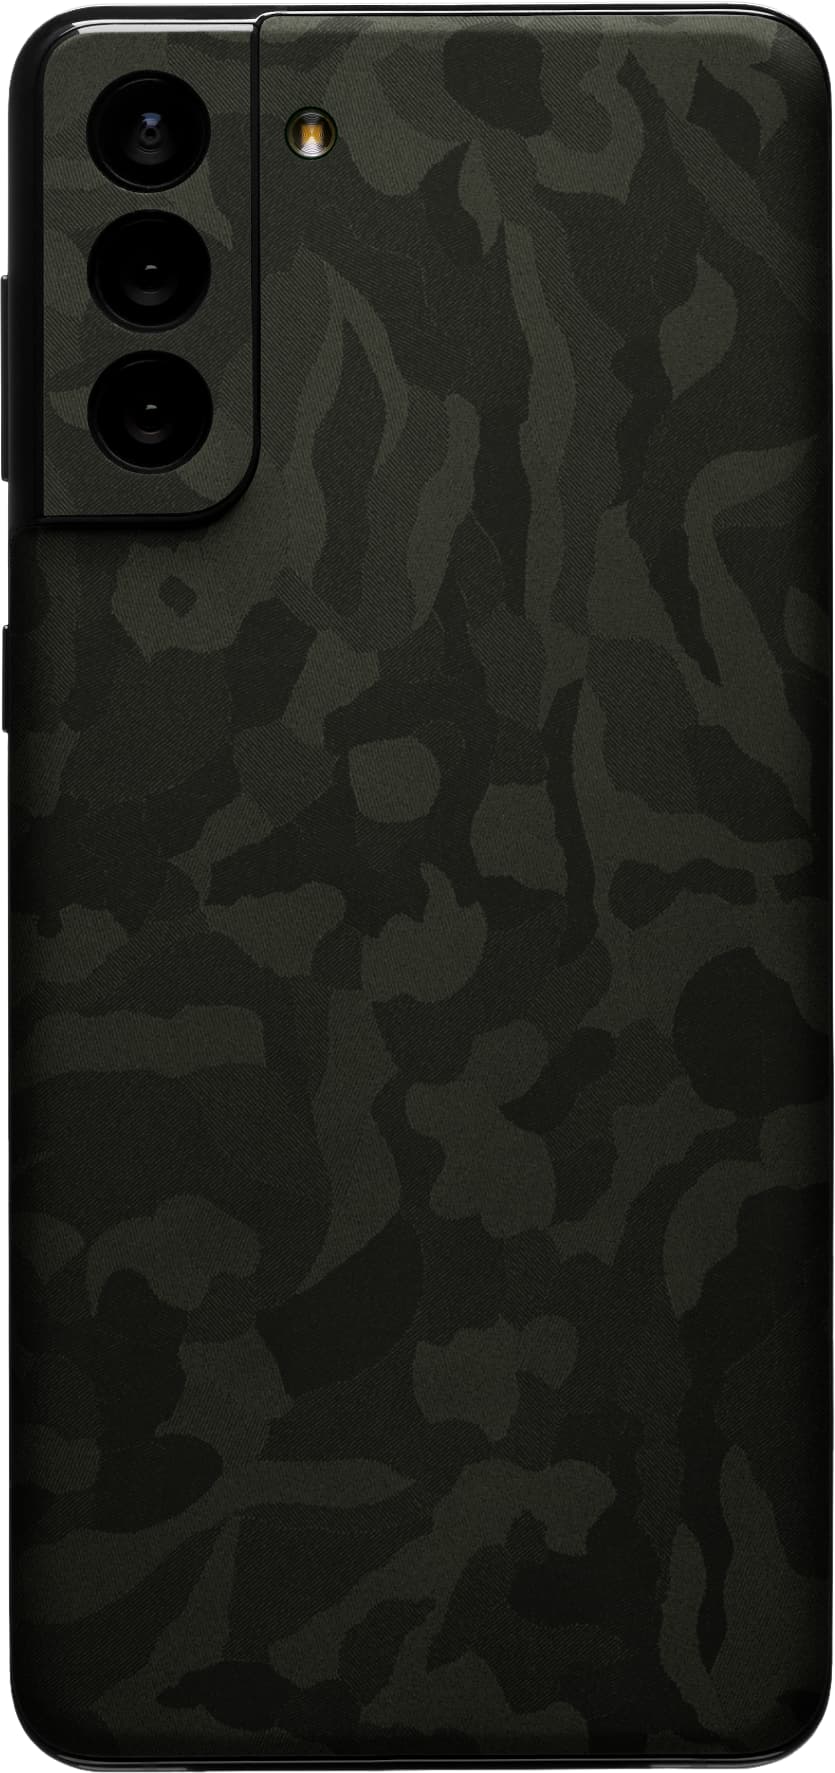 Galaxy S21 Skins, Wraps & Covers » dbrand